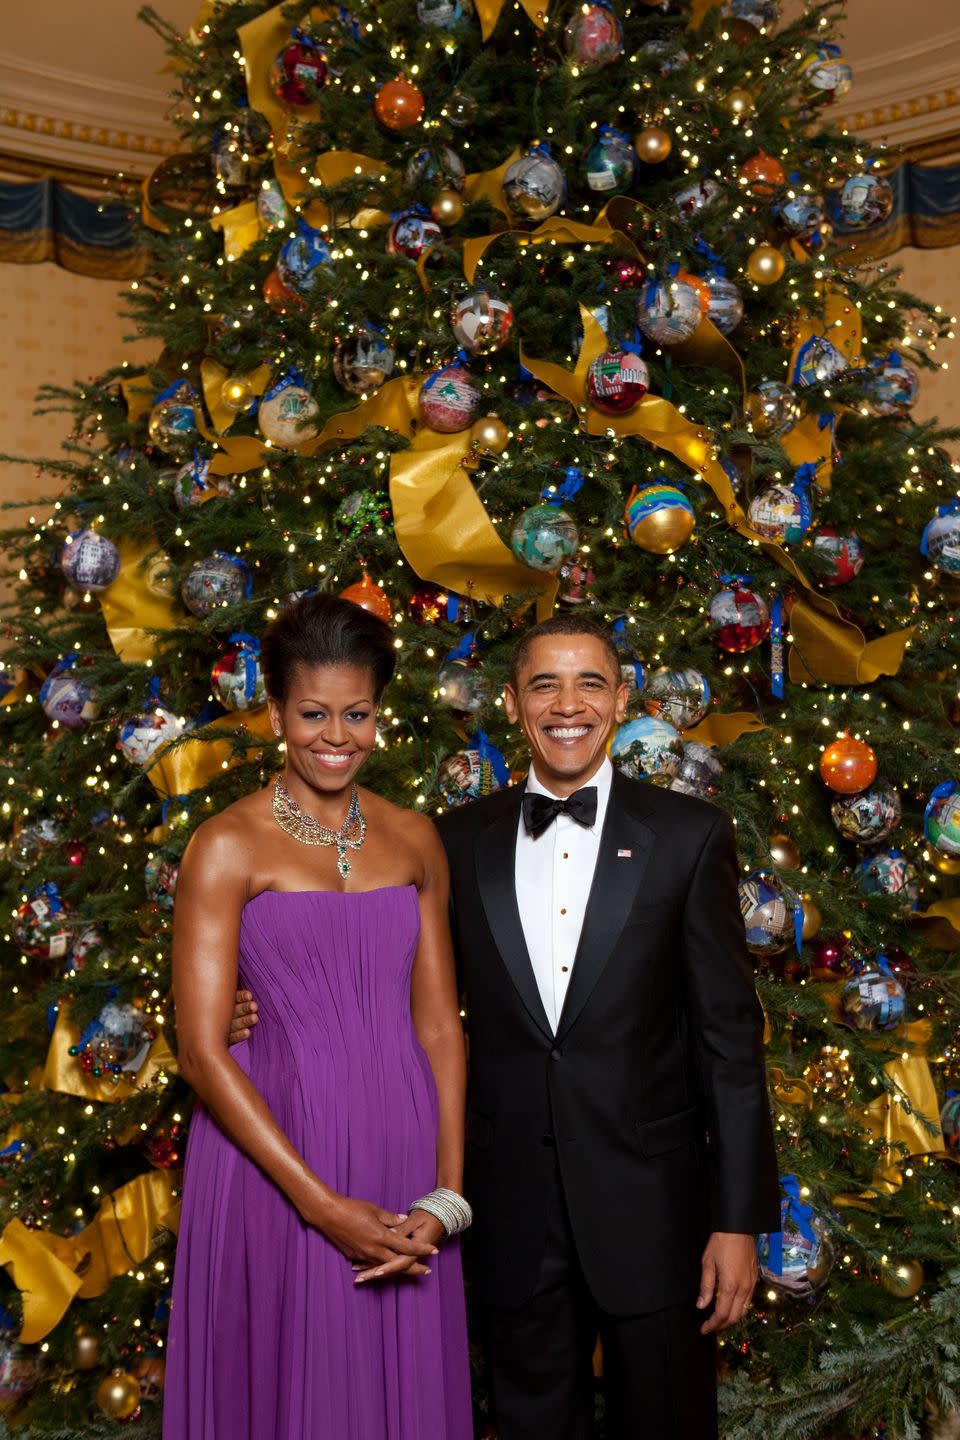 <p>Michelle Obama's first White House Christmas theme,"<a href="http://www.cnn.com/2009/US/12/03/white.house.christmas/" rel="nofollow noopener" target="_blank" data-ylk="slk:Reflect, Rejoice, and Renew" class="link ">Reflect, Rejoice, and Renew</a>," was environmentally conscious. Not only were the trees lit with LED lights, but six of the trees were replanted by the National Parks Service after being displayed. </p>